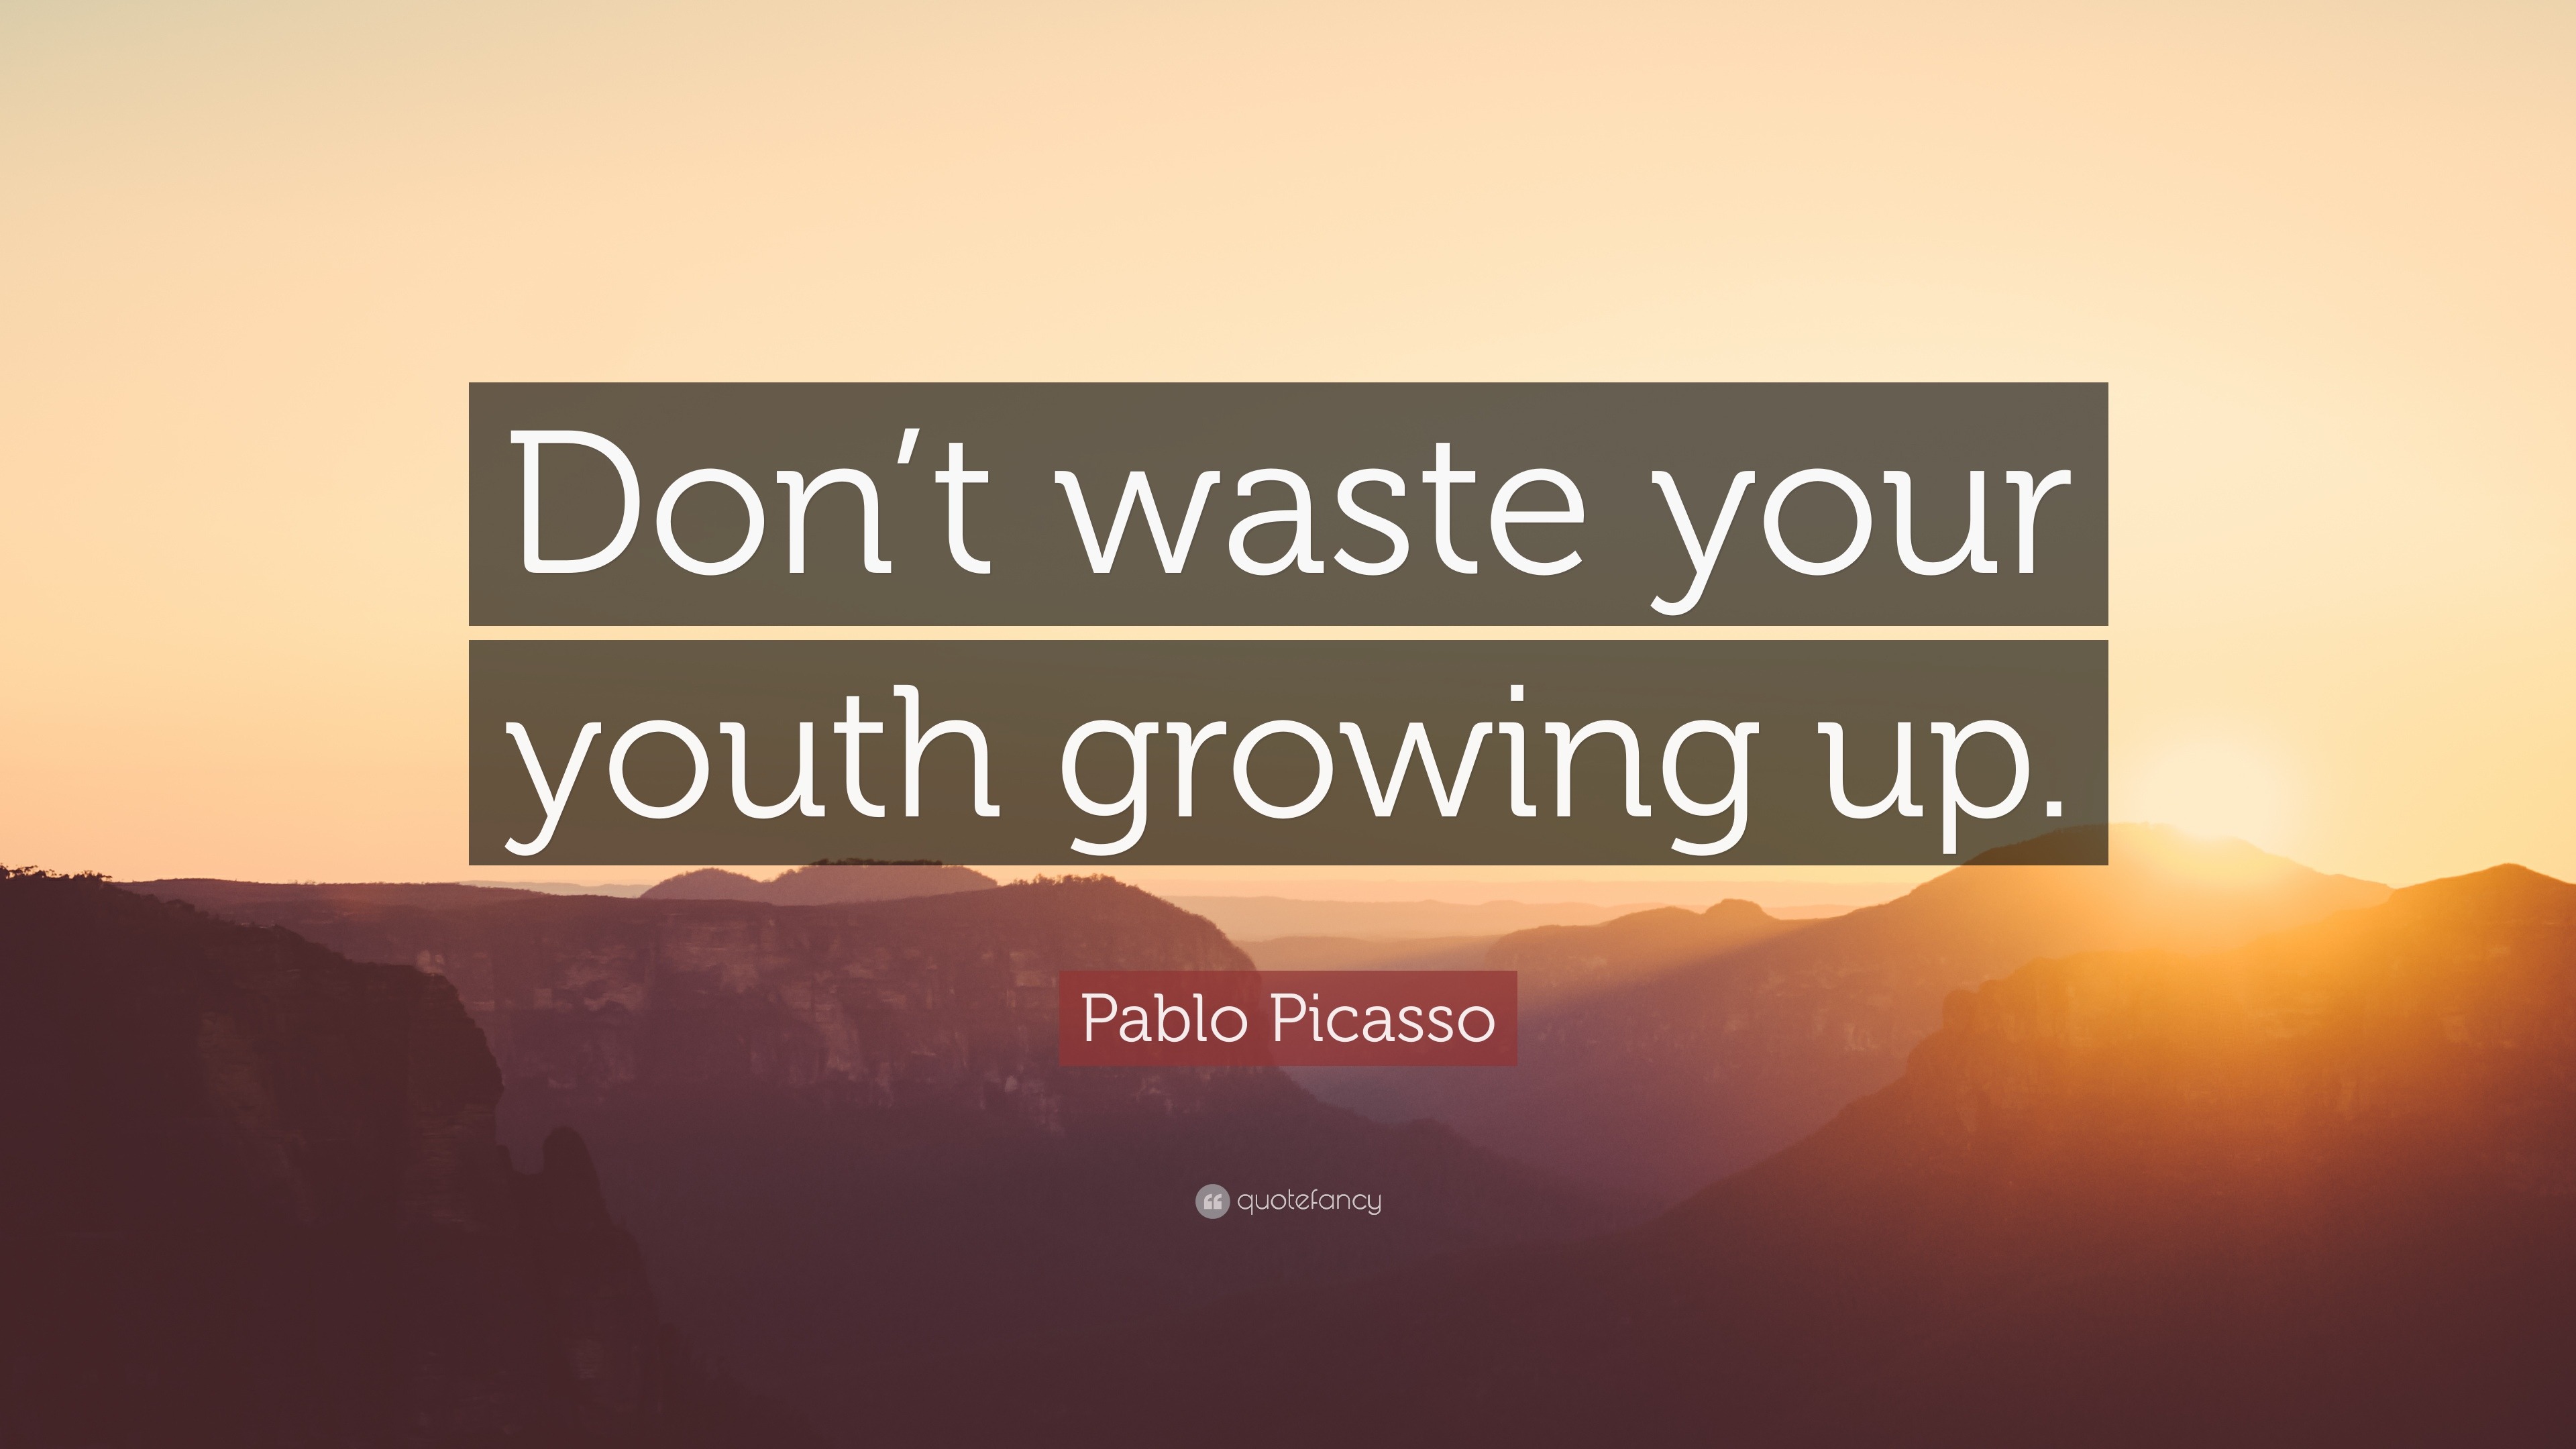 Quotes About Growing Up (41 wallpapers) - Quotefancy